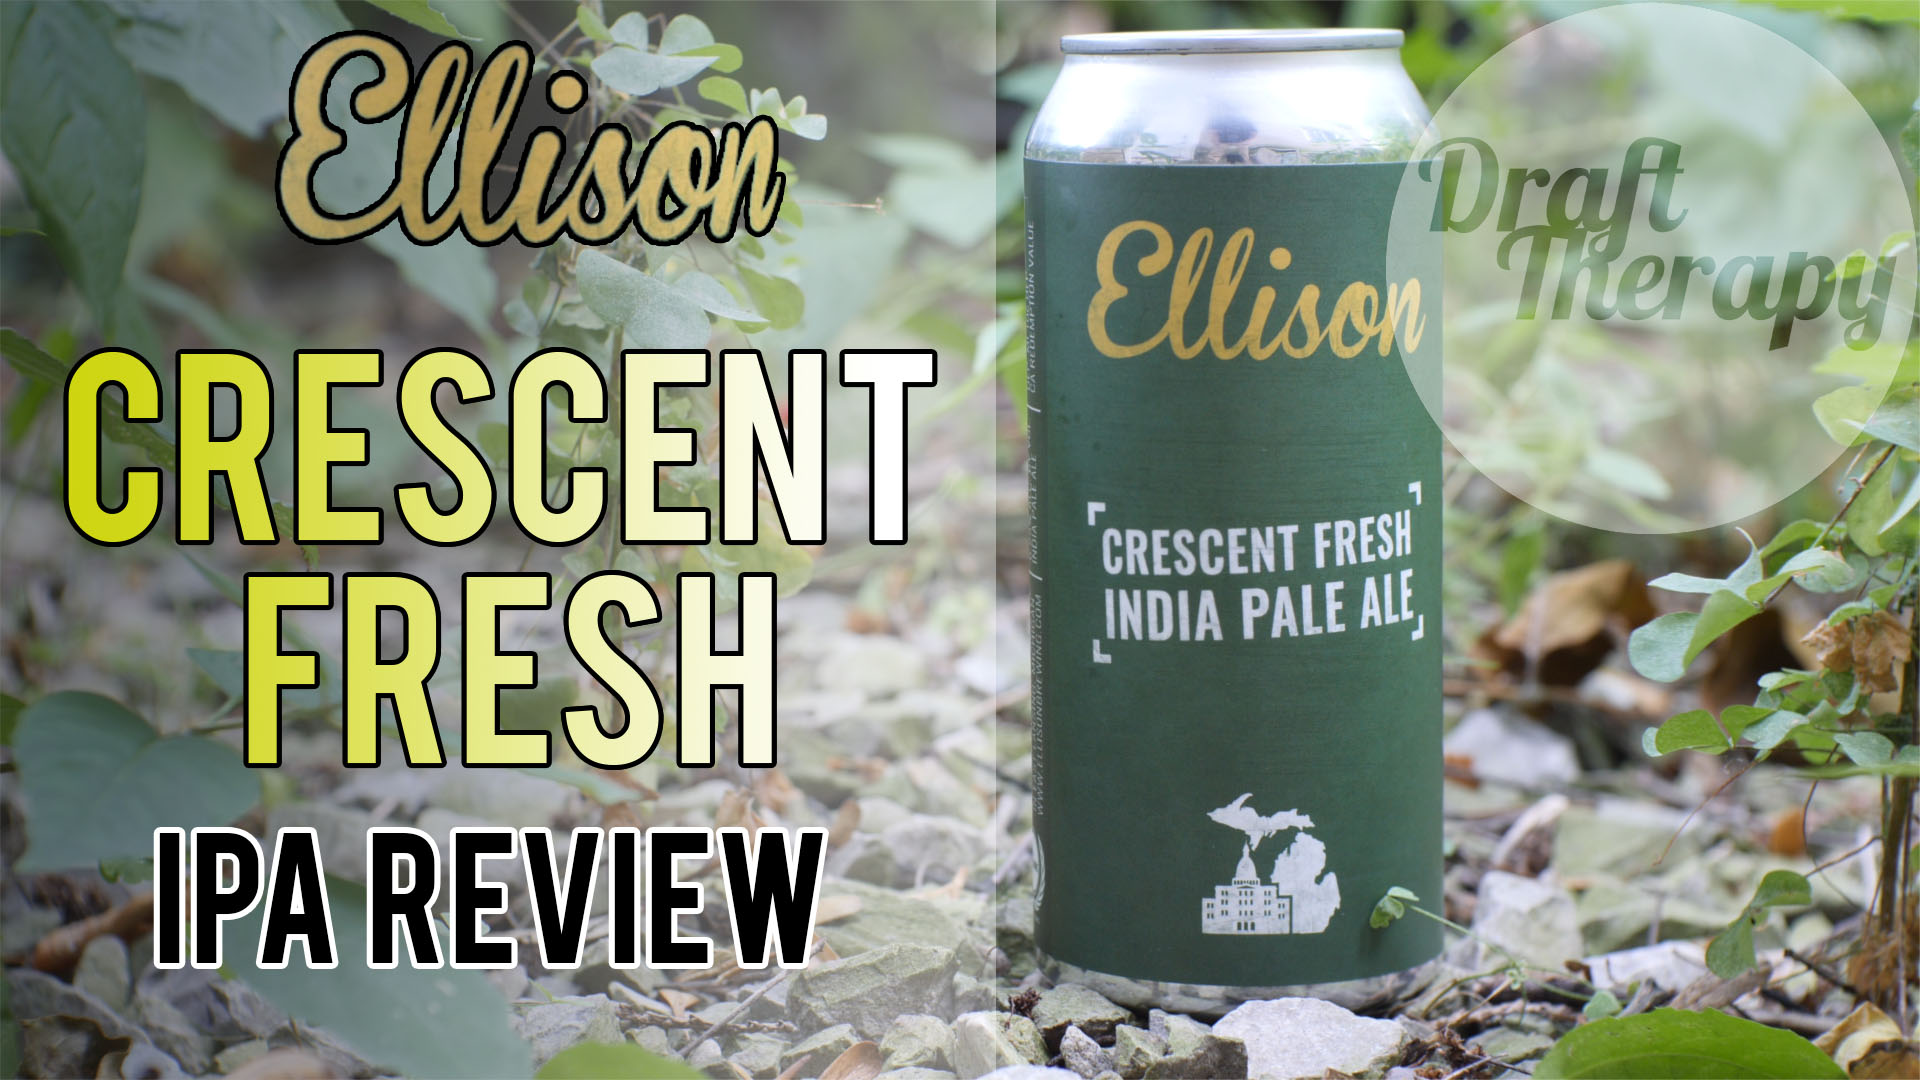 You are currently viewing Ellison Crescent Fresh IPA Review